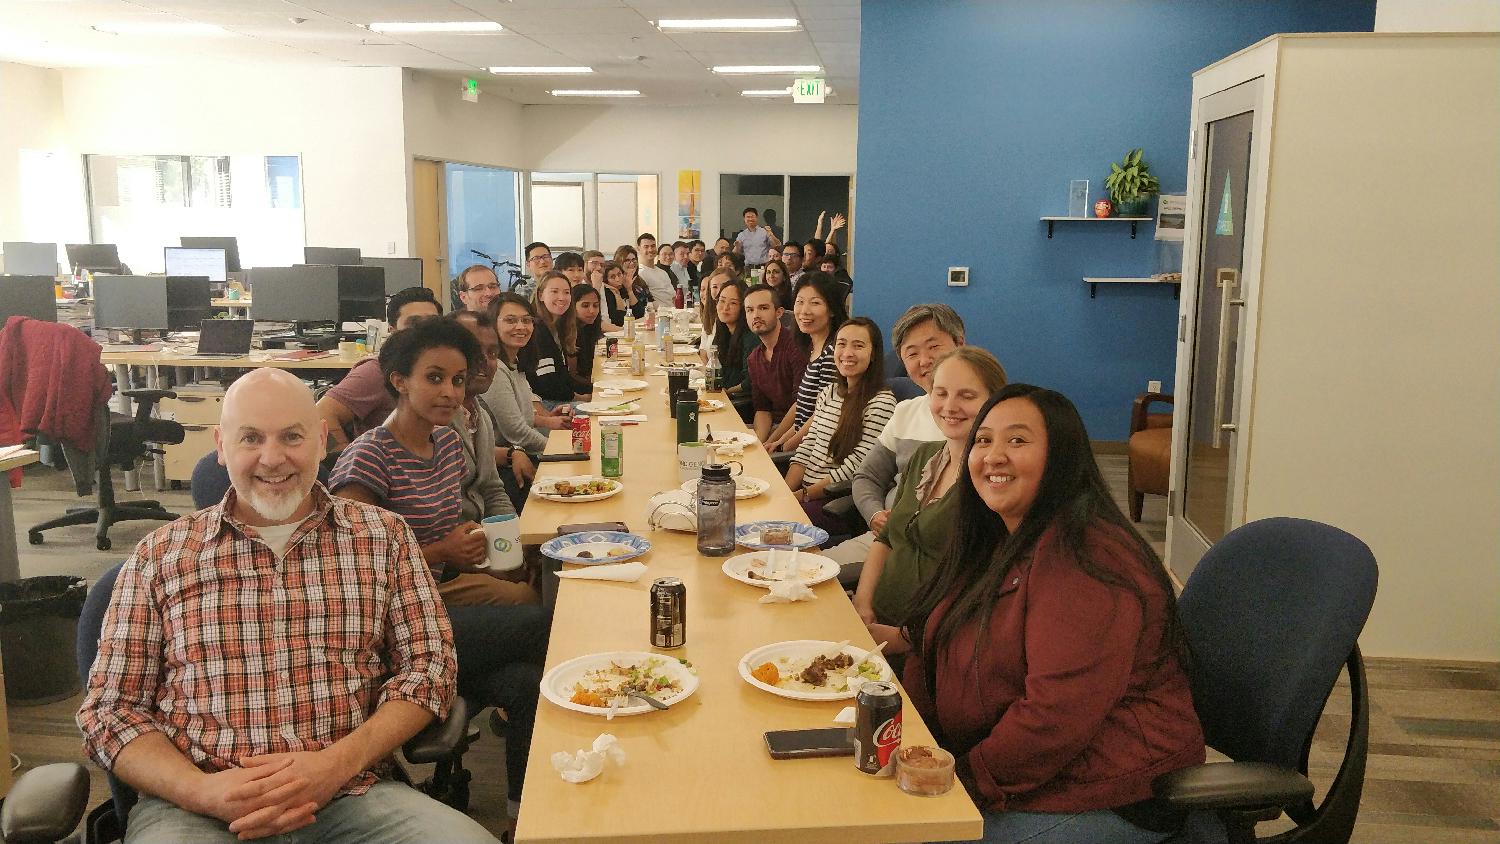 The team at our annual Thanksgiving potluck. Every year we line up our desks for true family-style dining. 